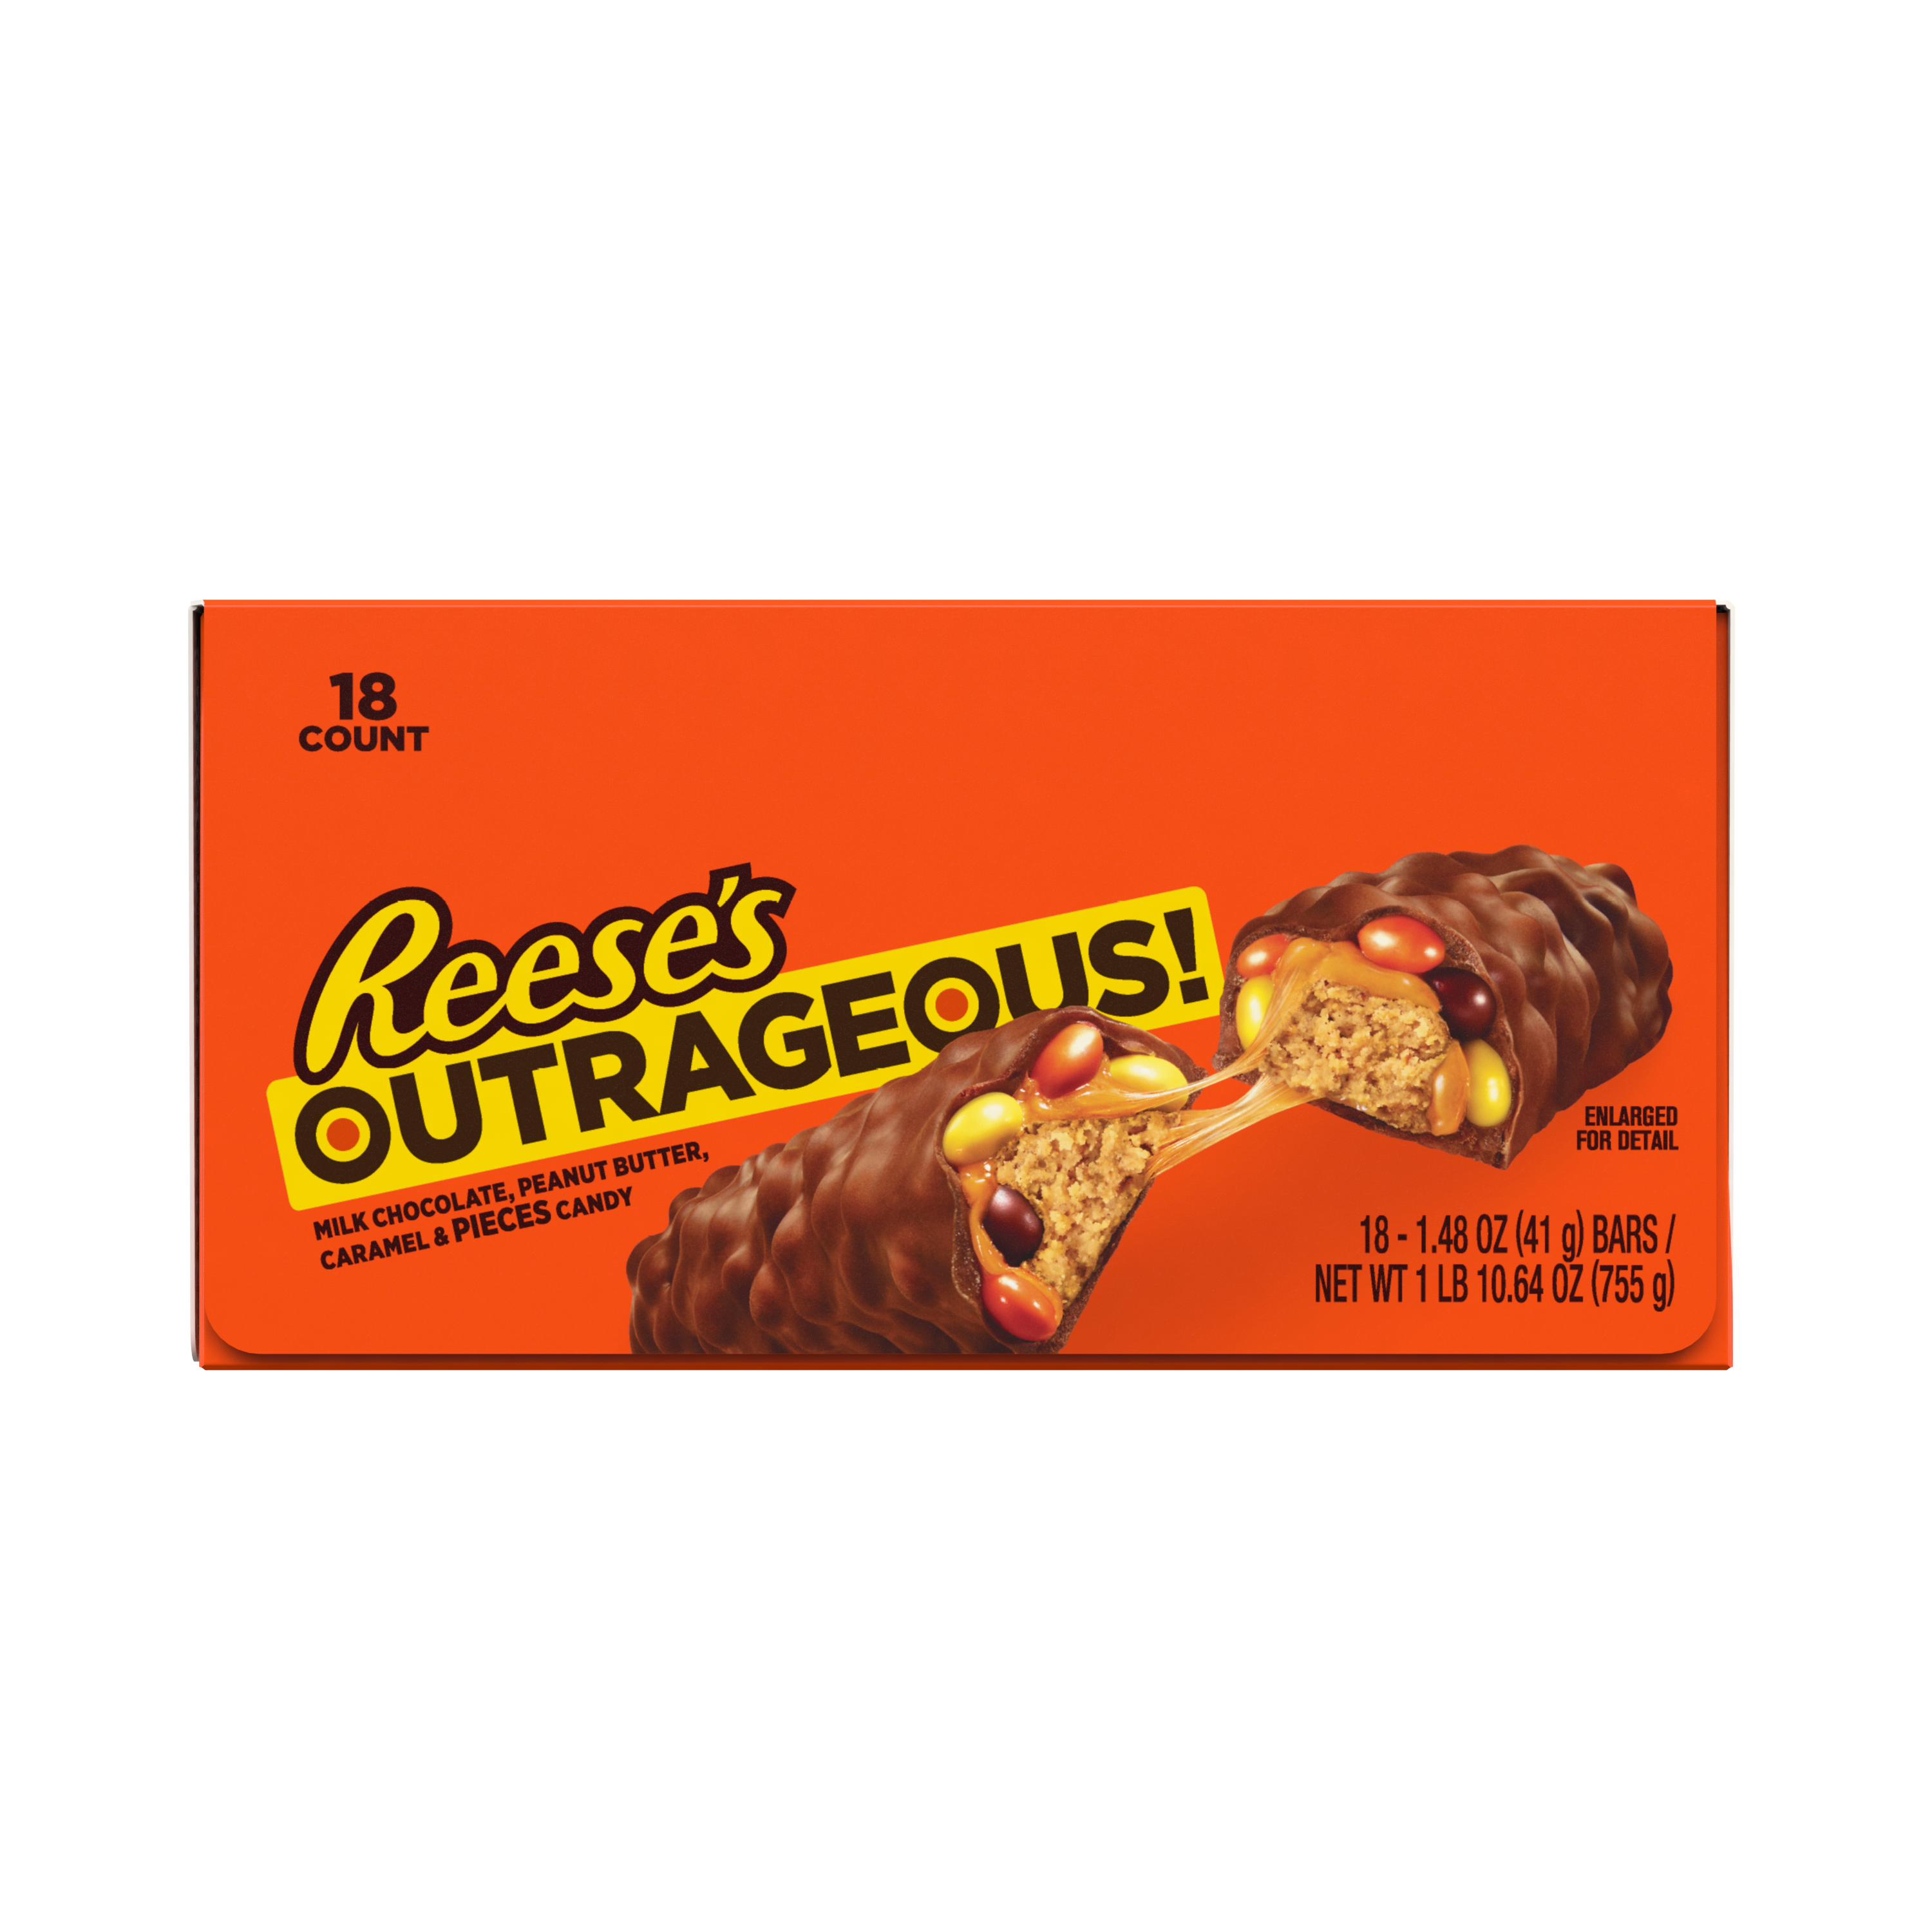 REESE'S OUTRAGEOUS! Milk Chocolate Peanut Butter Candy Bars, 1.48 oz box, 18 count - Front of Package